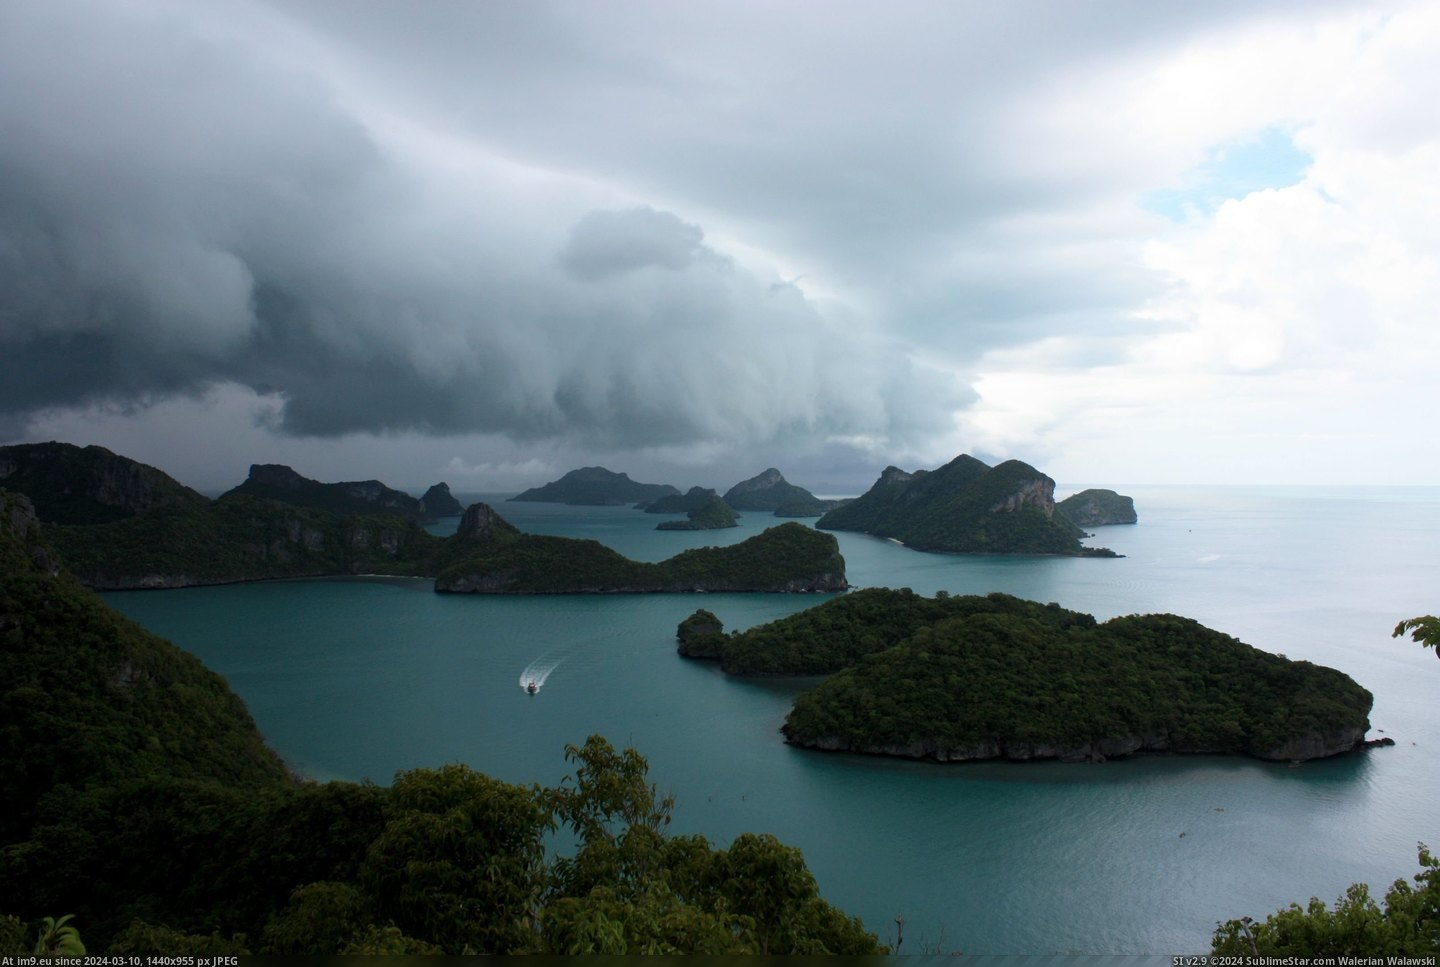 #Picture #National #Favourite #Rain #Incoming #Backpacked #Ang #Thong #Thailand #Marine #Waited [Earthporn] [OC] Backpacked in Thailand, waited for the incoming rain to take my favourite picture. Ang Thong Marine National Pa Pic. (Image of album My r/EARTHPORN favs))